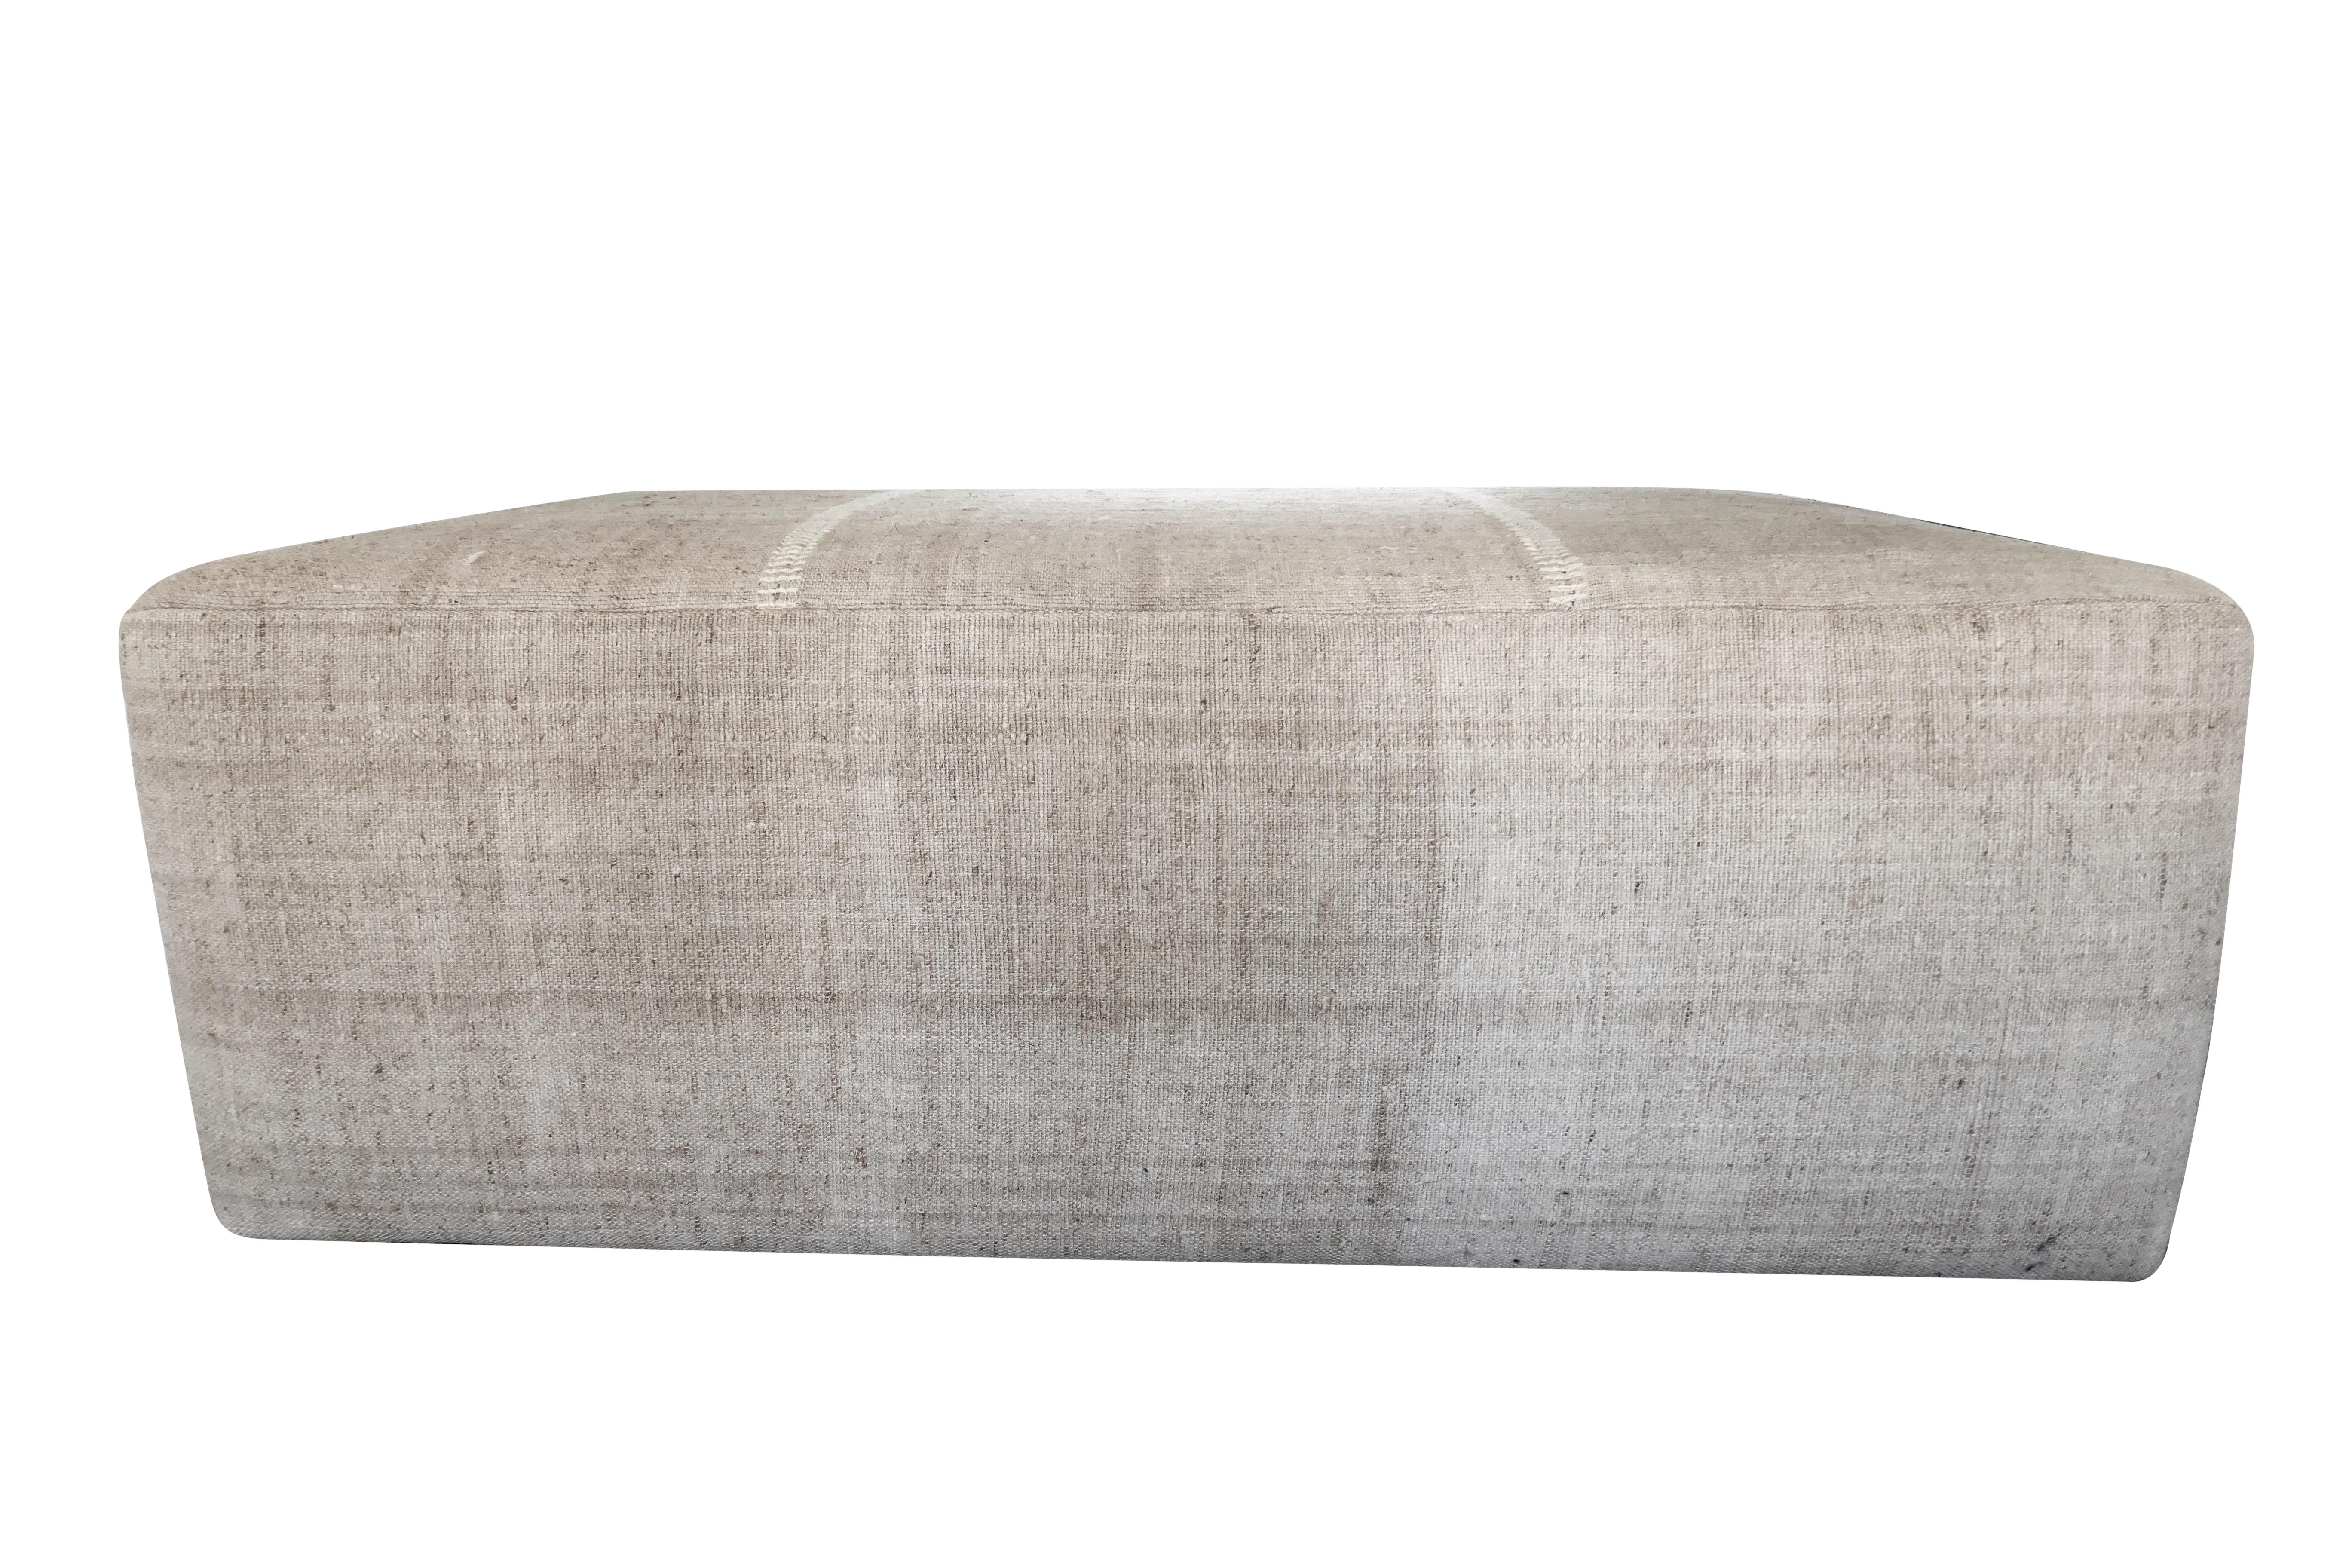 One-of-a-Kind!
FI custom large cocktail style ottoman. Perfectly upholstered in outstanding authentic vintage hand-woven heavy textural Berber tribal Kilim natural hand-spun hemp in beautiful variegated muted tones. Featuring the original hand